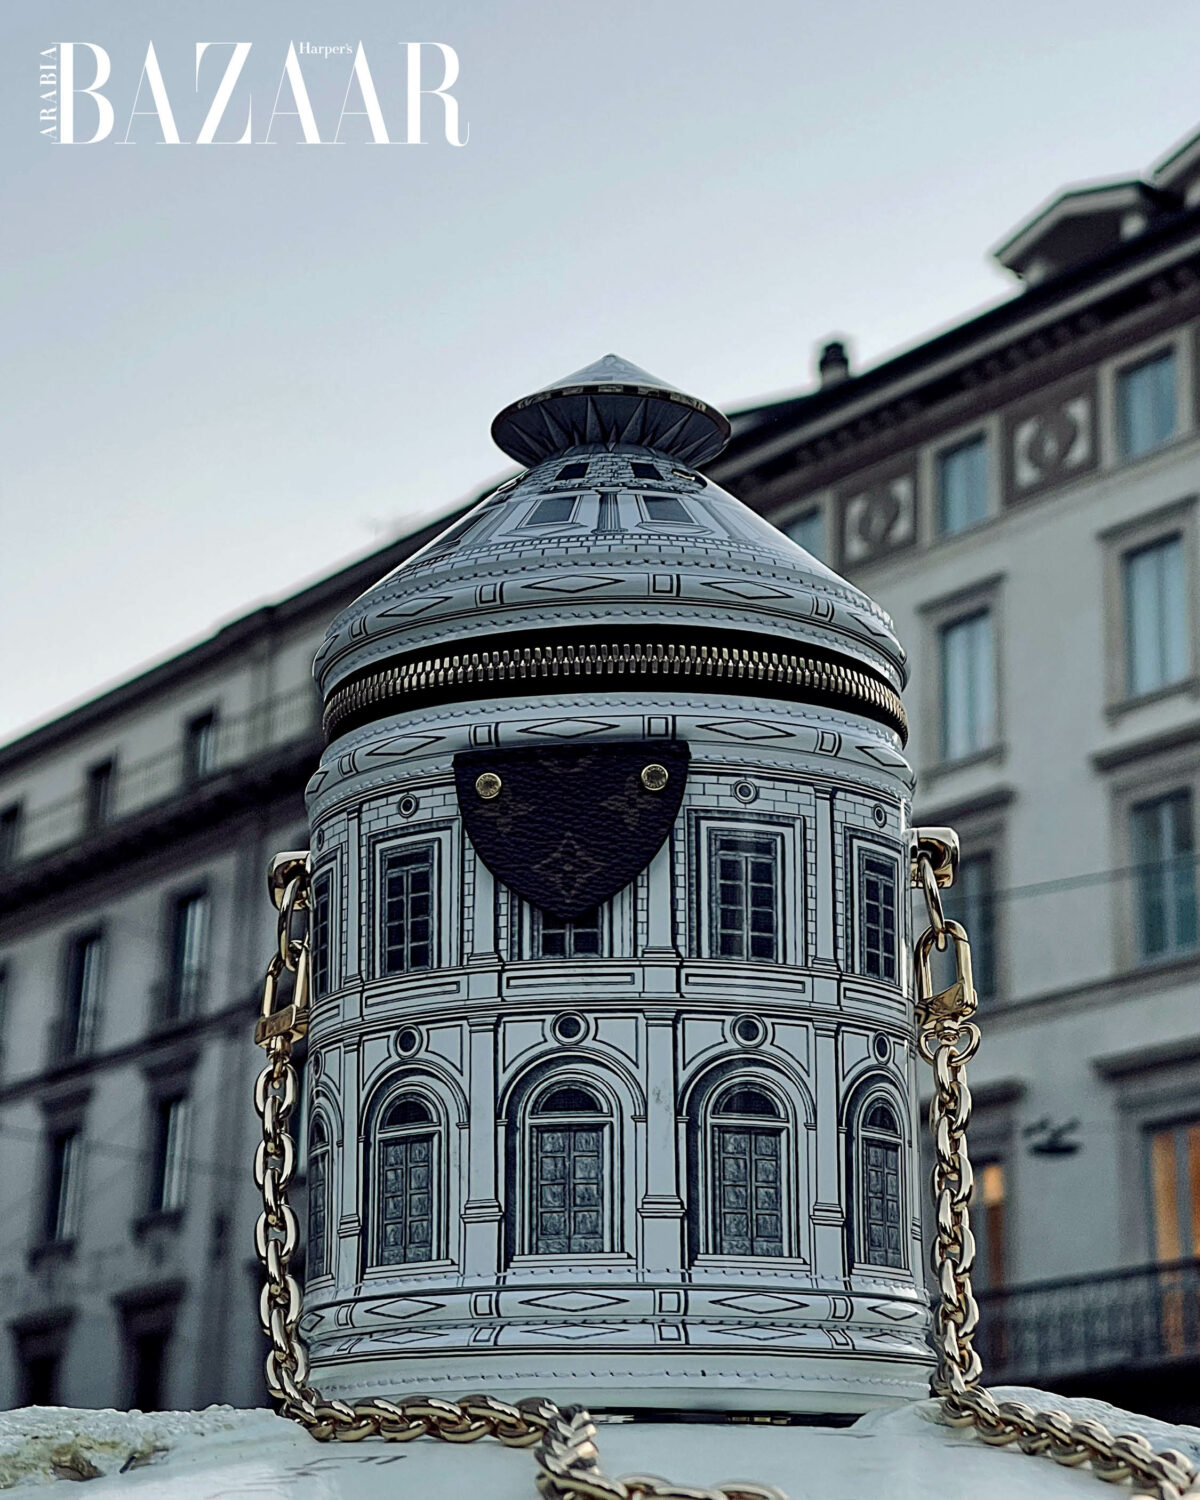 FORNASETTI on X: As part of the #LVXFORNASETTI collaboration, the unique  Malle Coiffeuse was imagined by blending the Italian Atelier's emblematic,  creative aesthetic with the Maison's traditional craftsmanship. Discover  more on  #